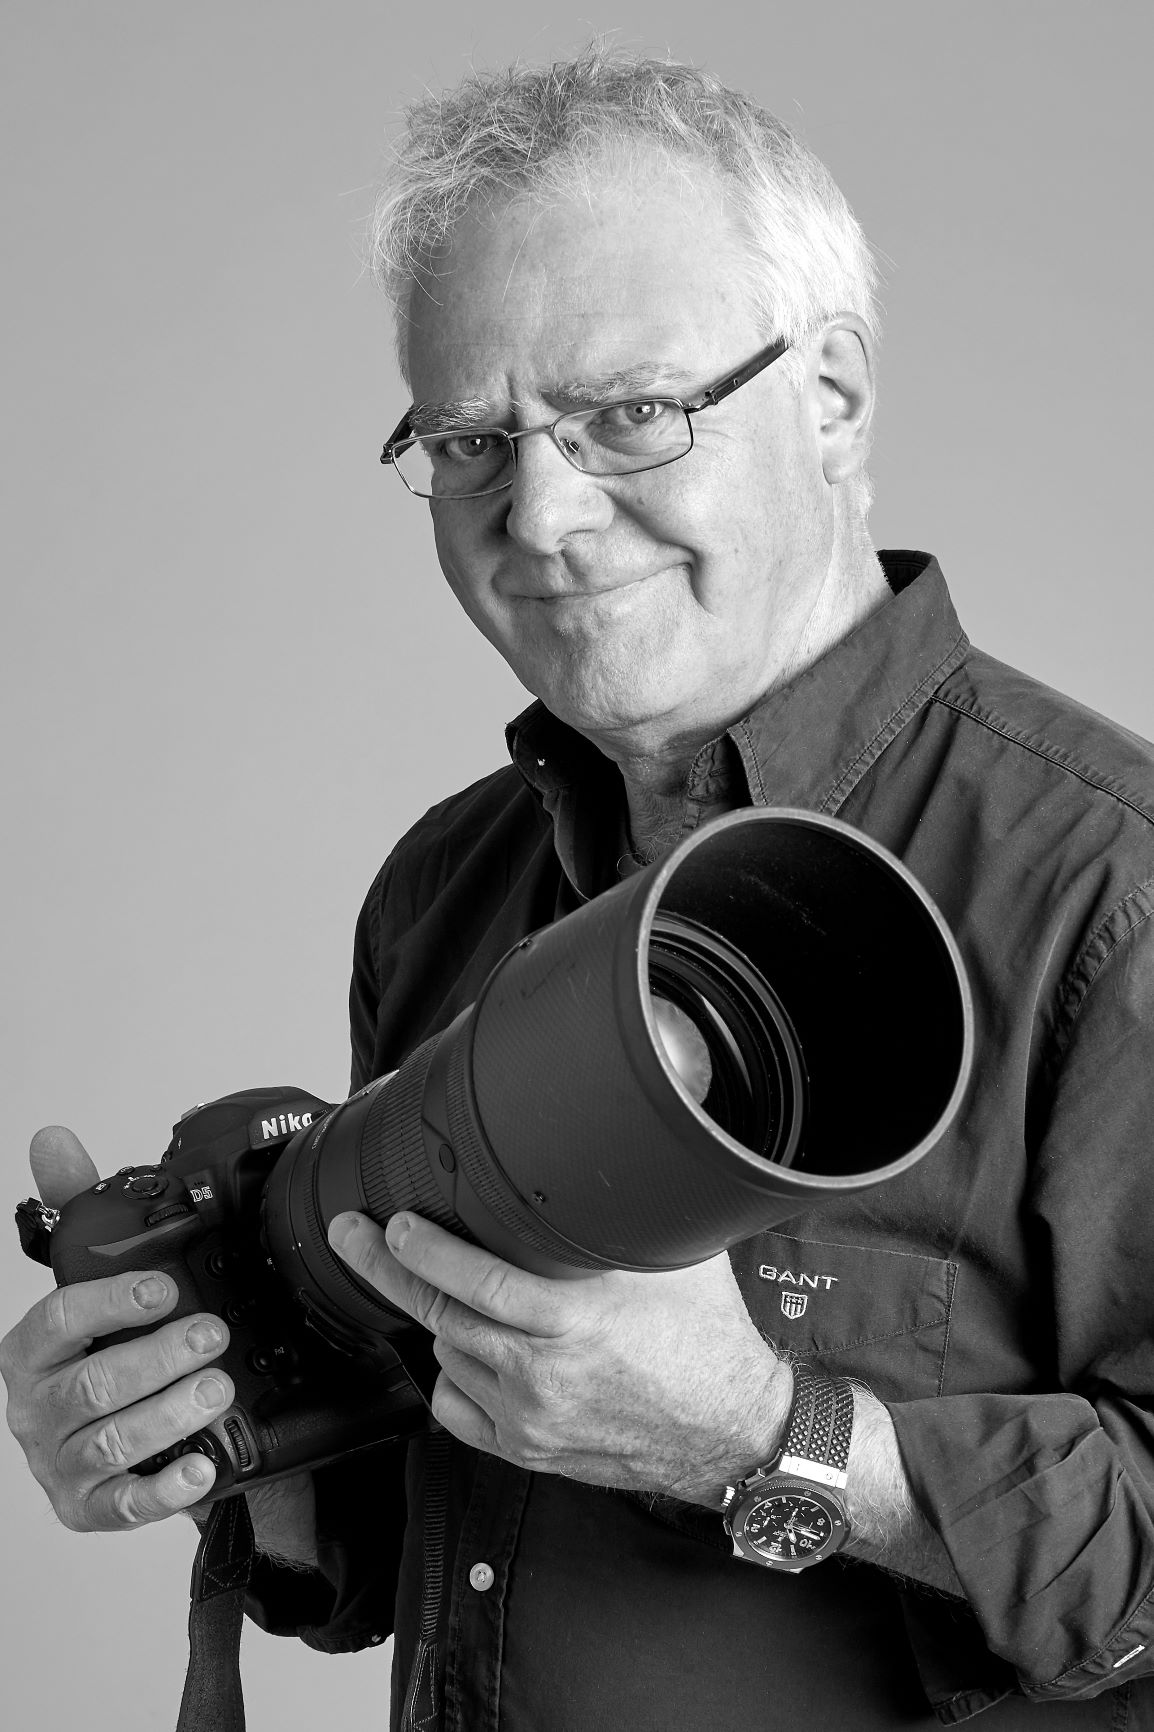 Jean-Guy Python, photojournalist and author of the book 'Suisses en mer' (Swiss at sea)